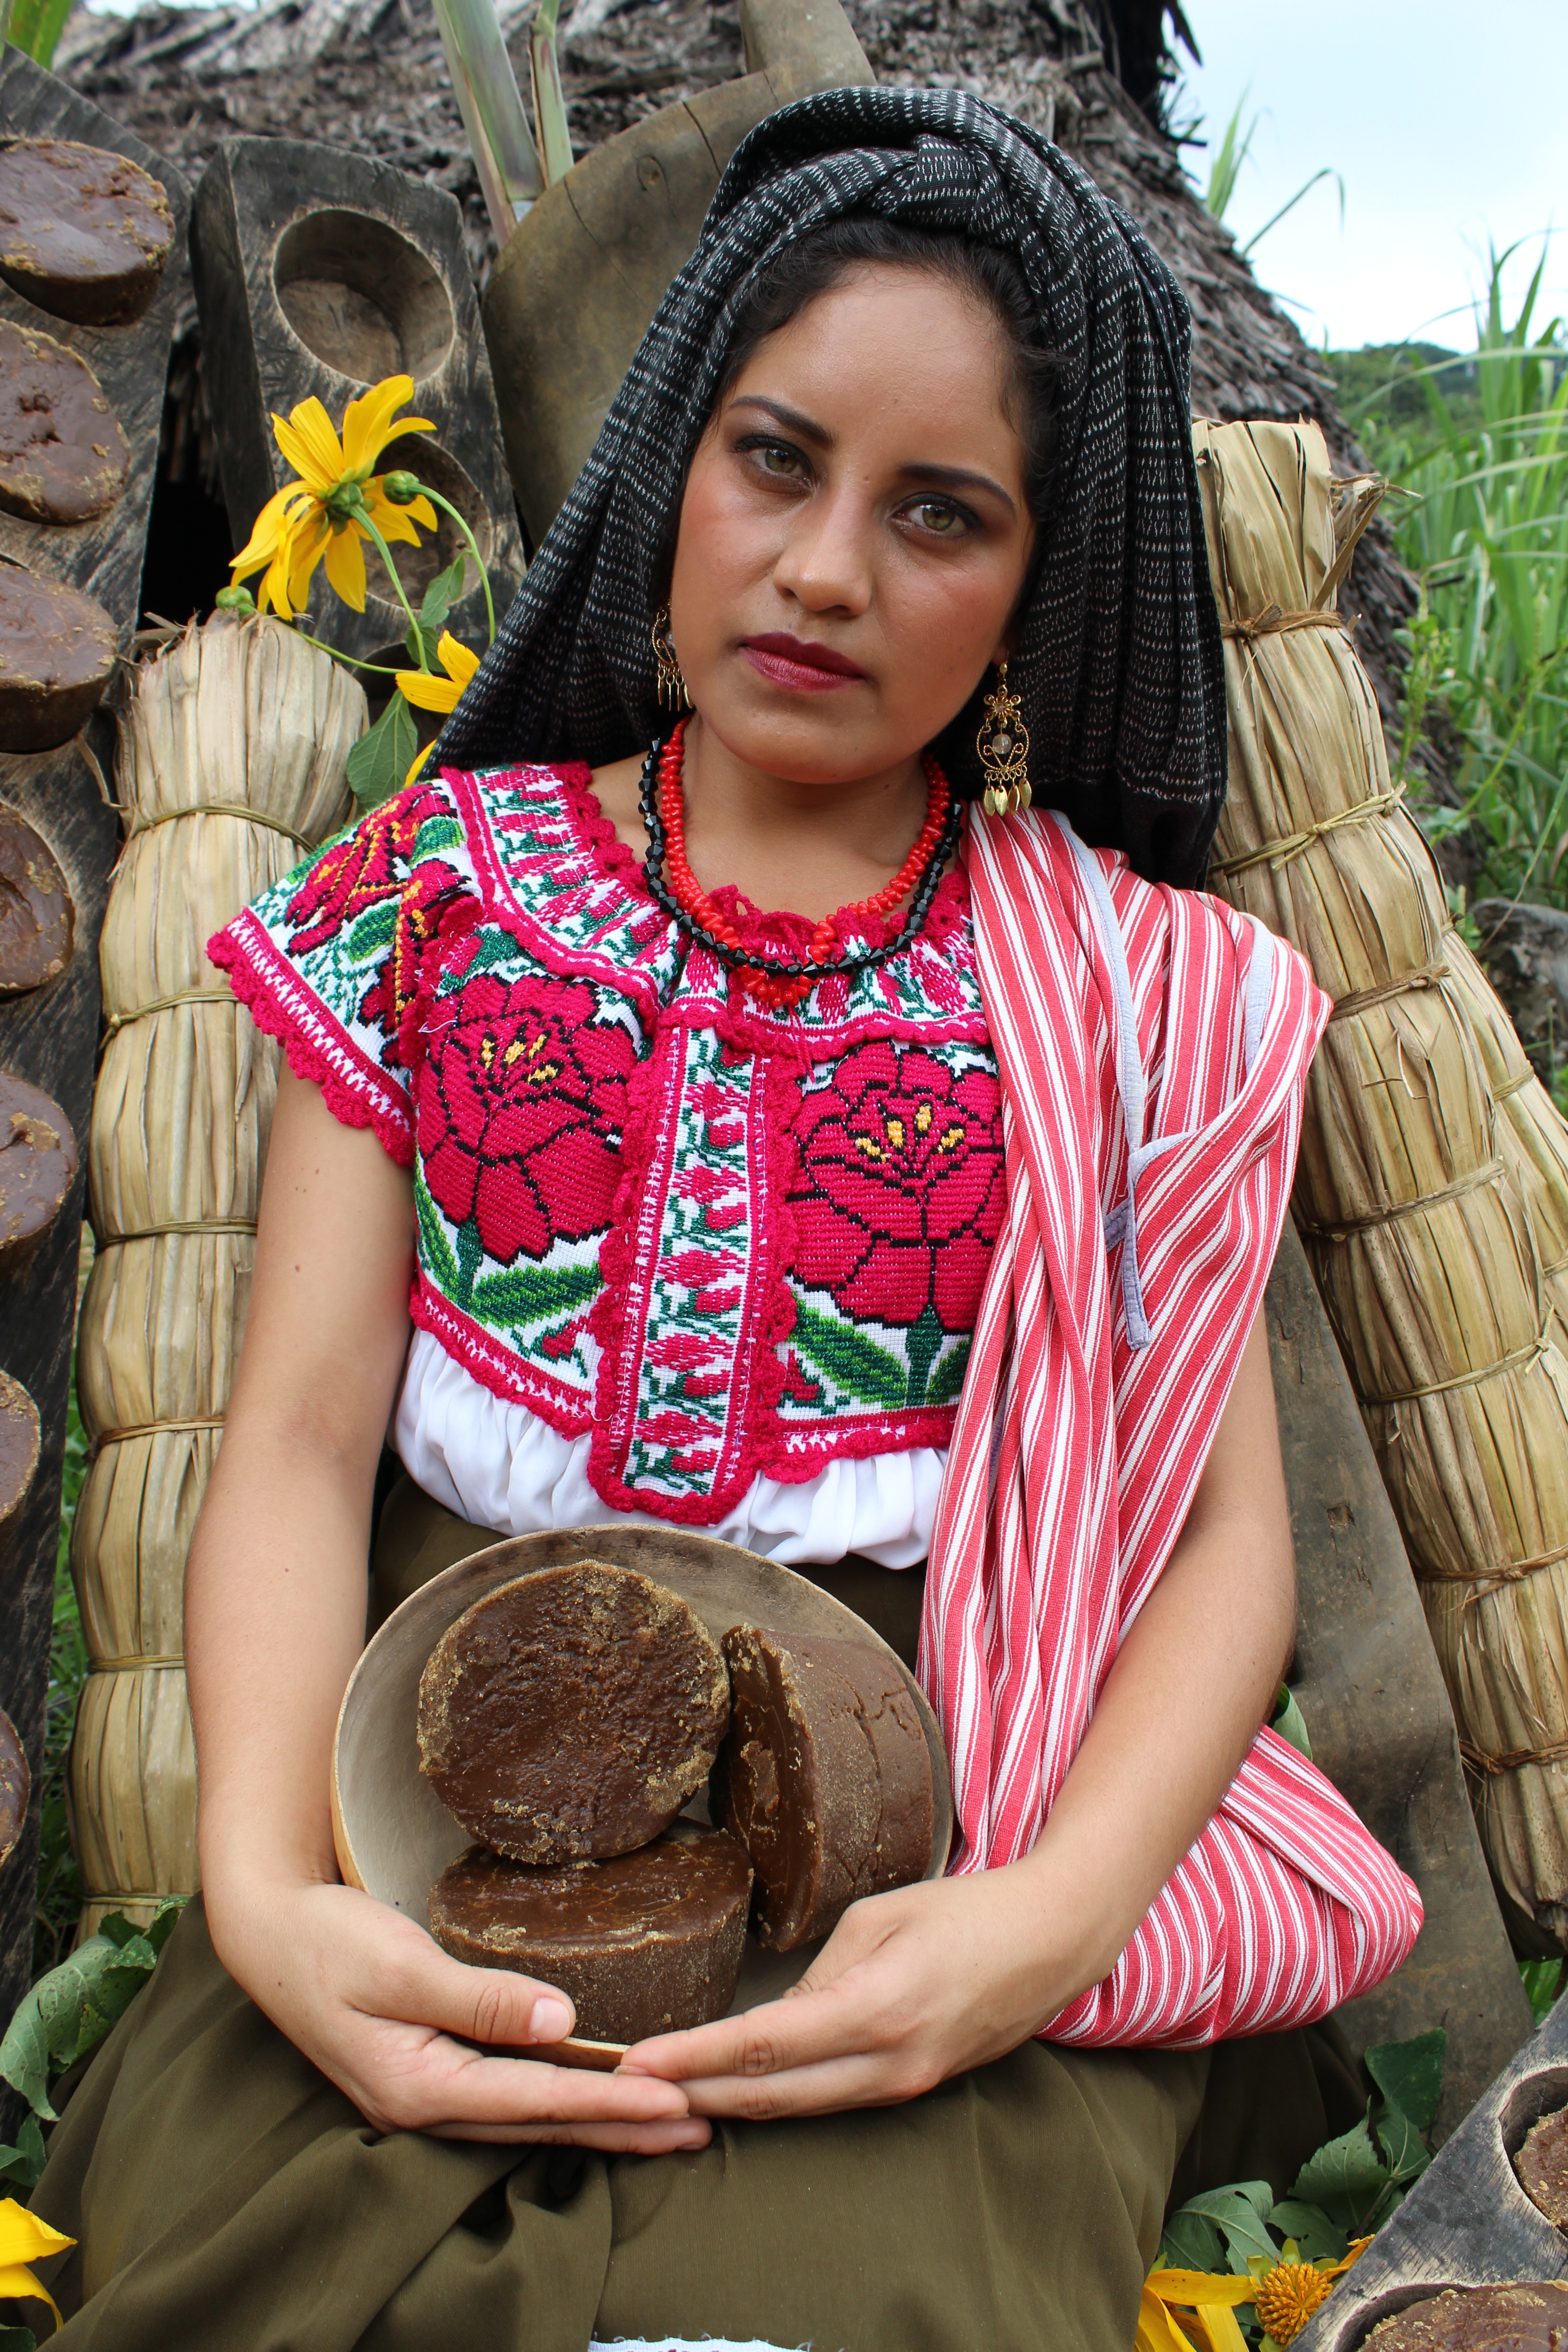 File:Woman from Mexico.jpg - Wikipedia